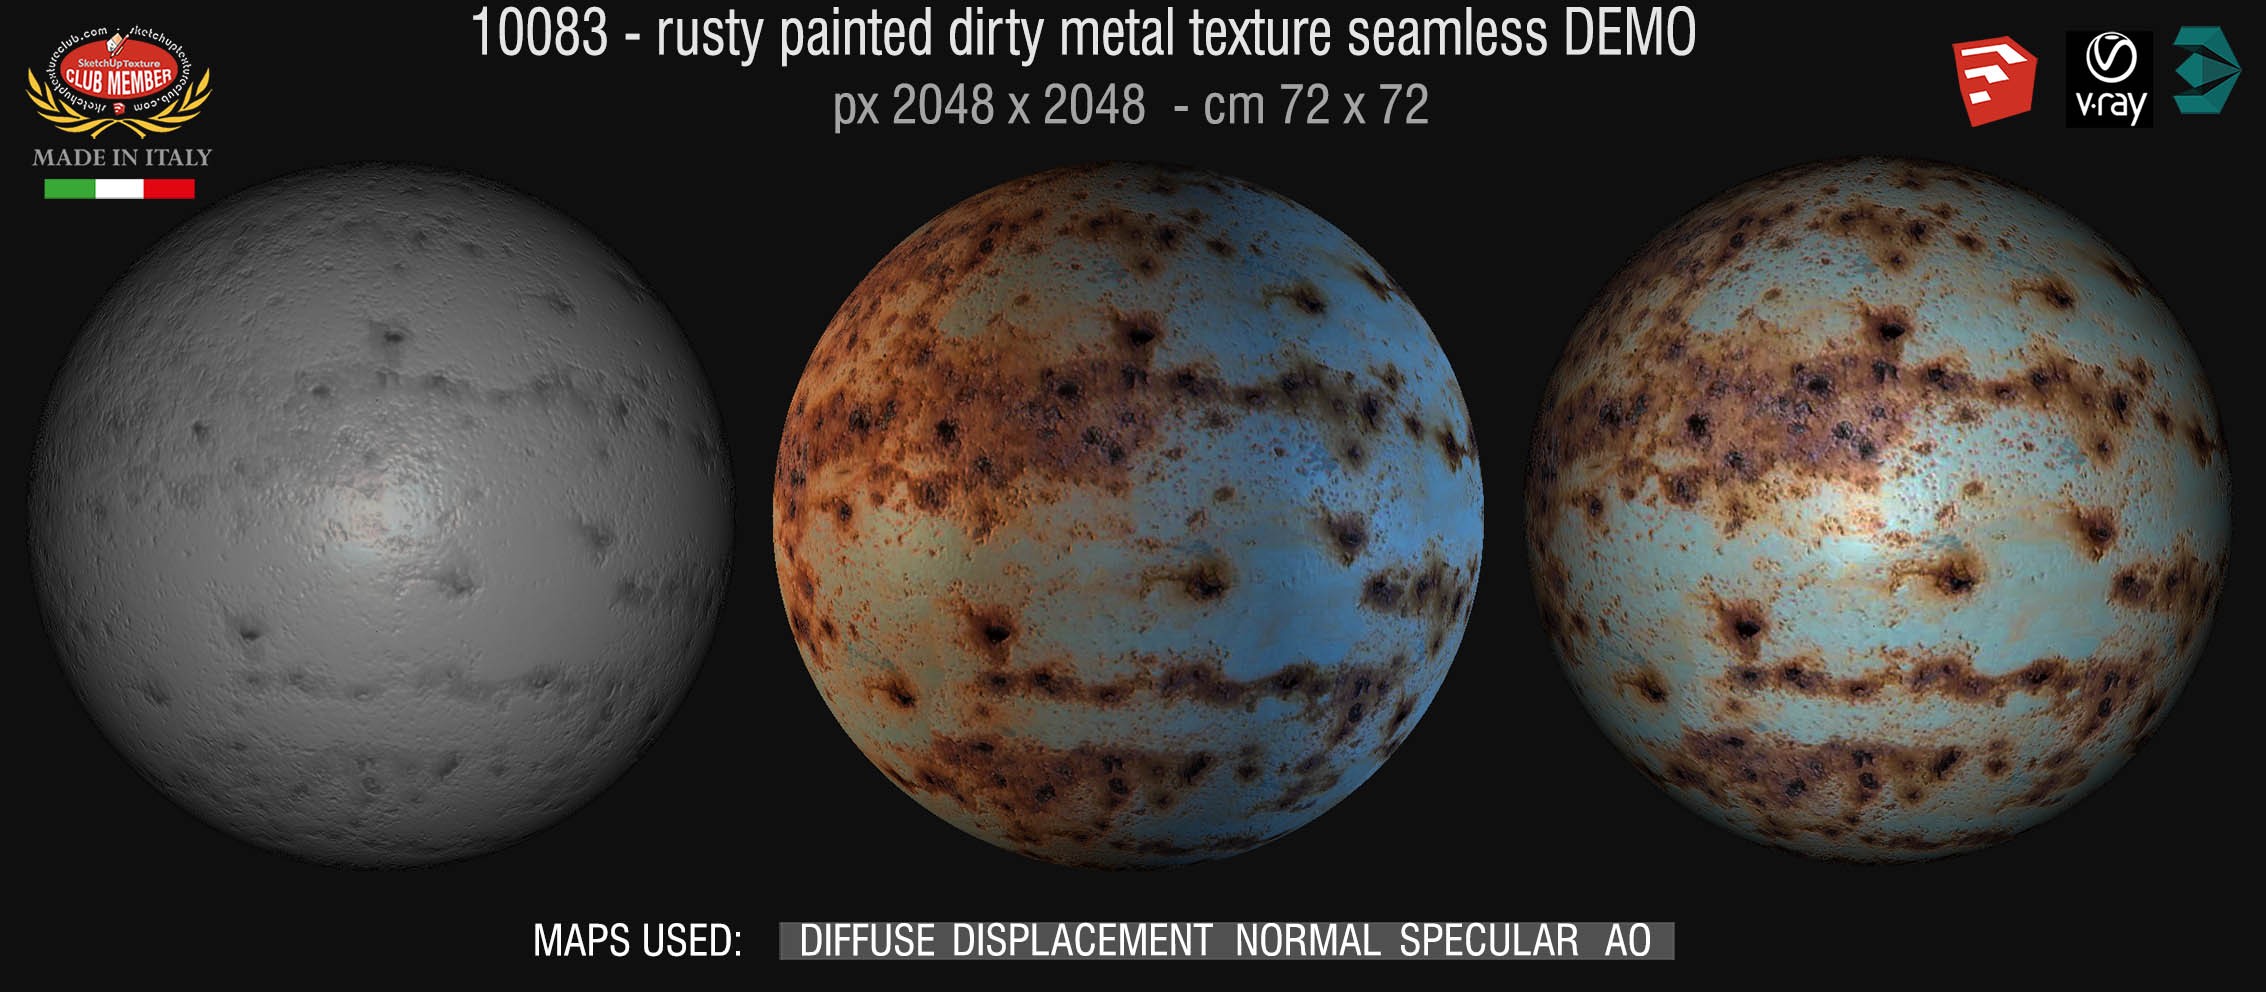 10083 HR Rusty painted dirty metal texture seamless + maps DEMO